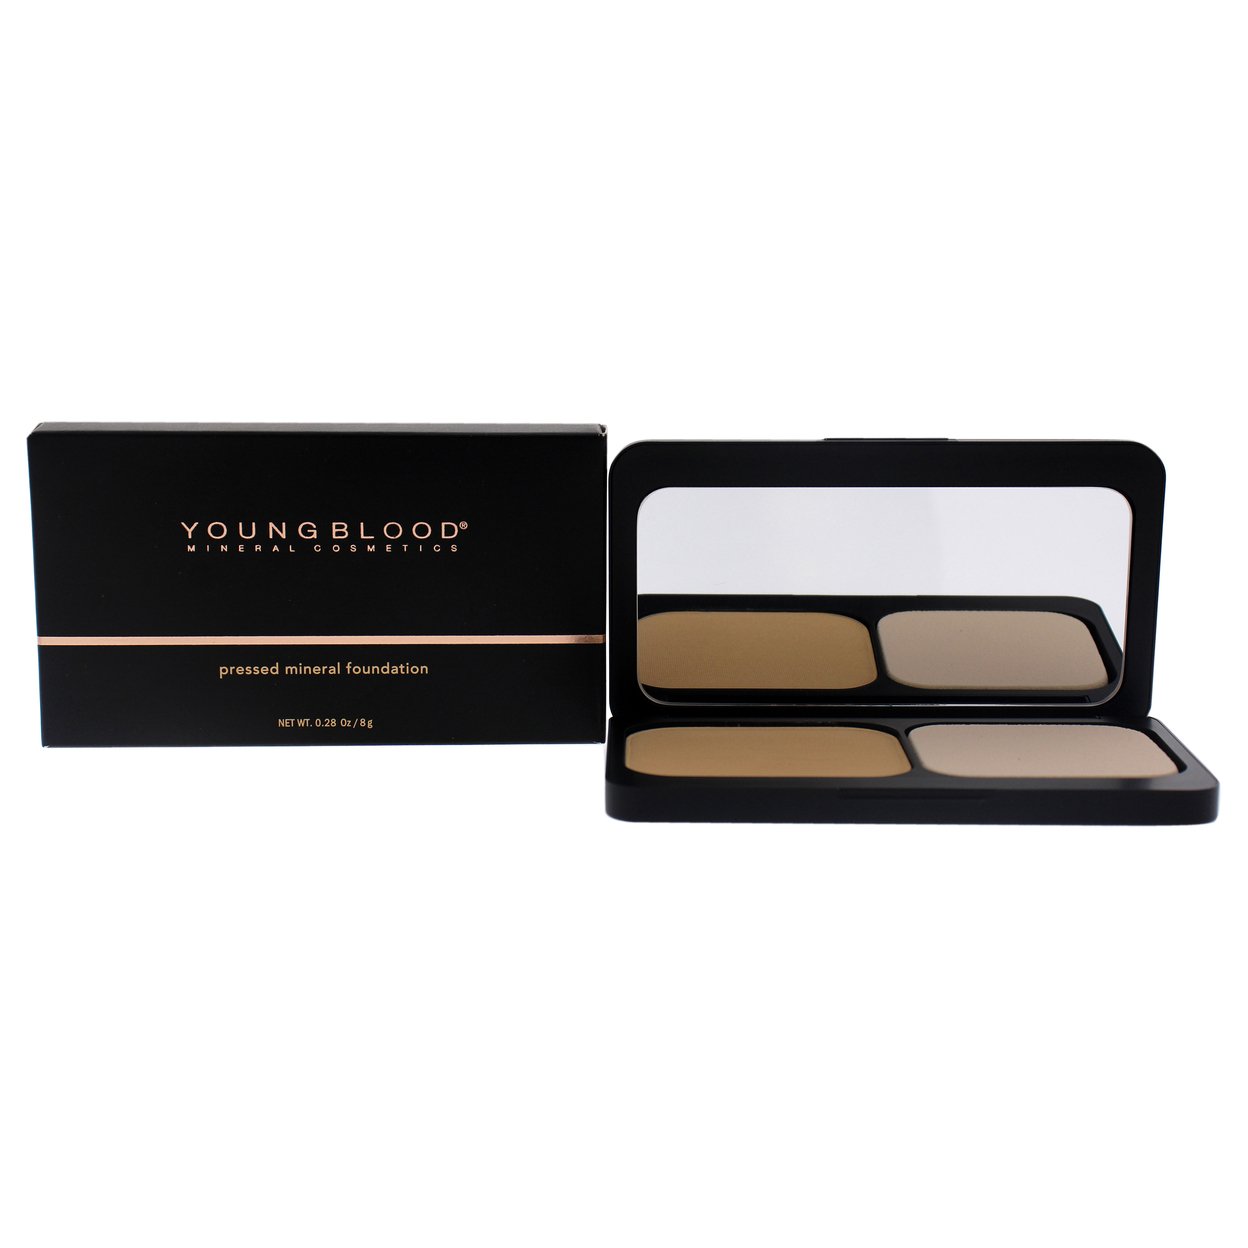 Youngblood Women COSMETIC Pressed Mineral Foundation - Warm Beige 0.28 Oz